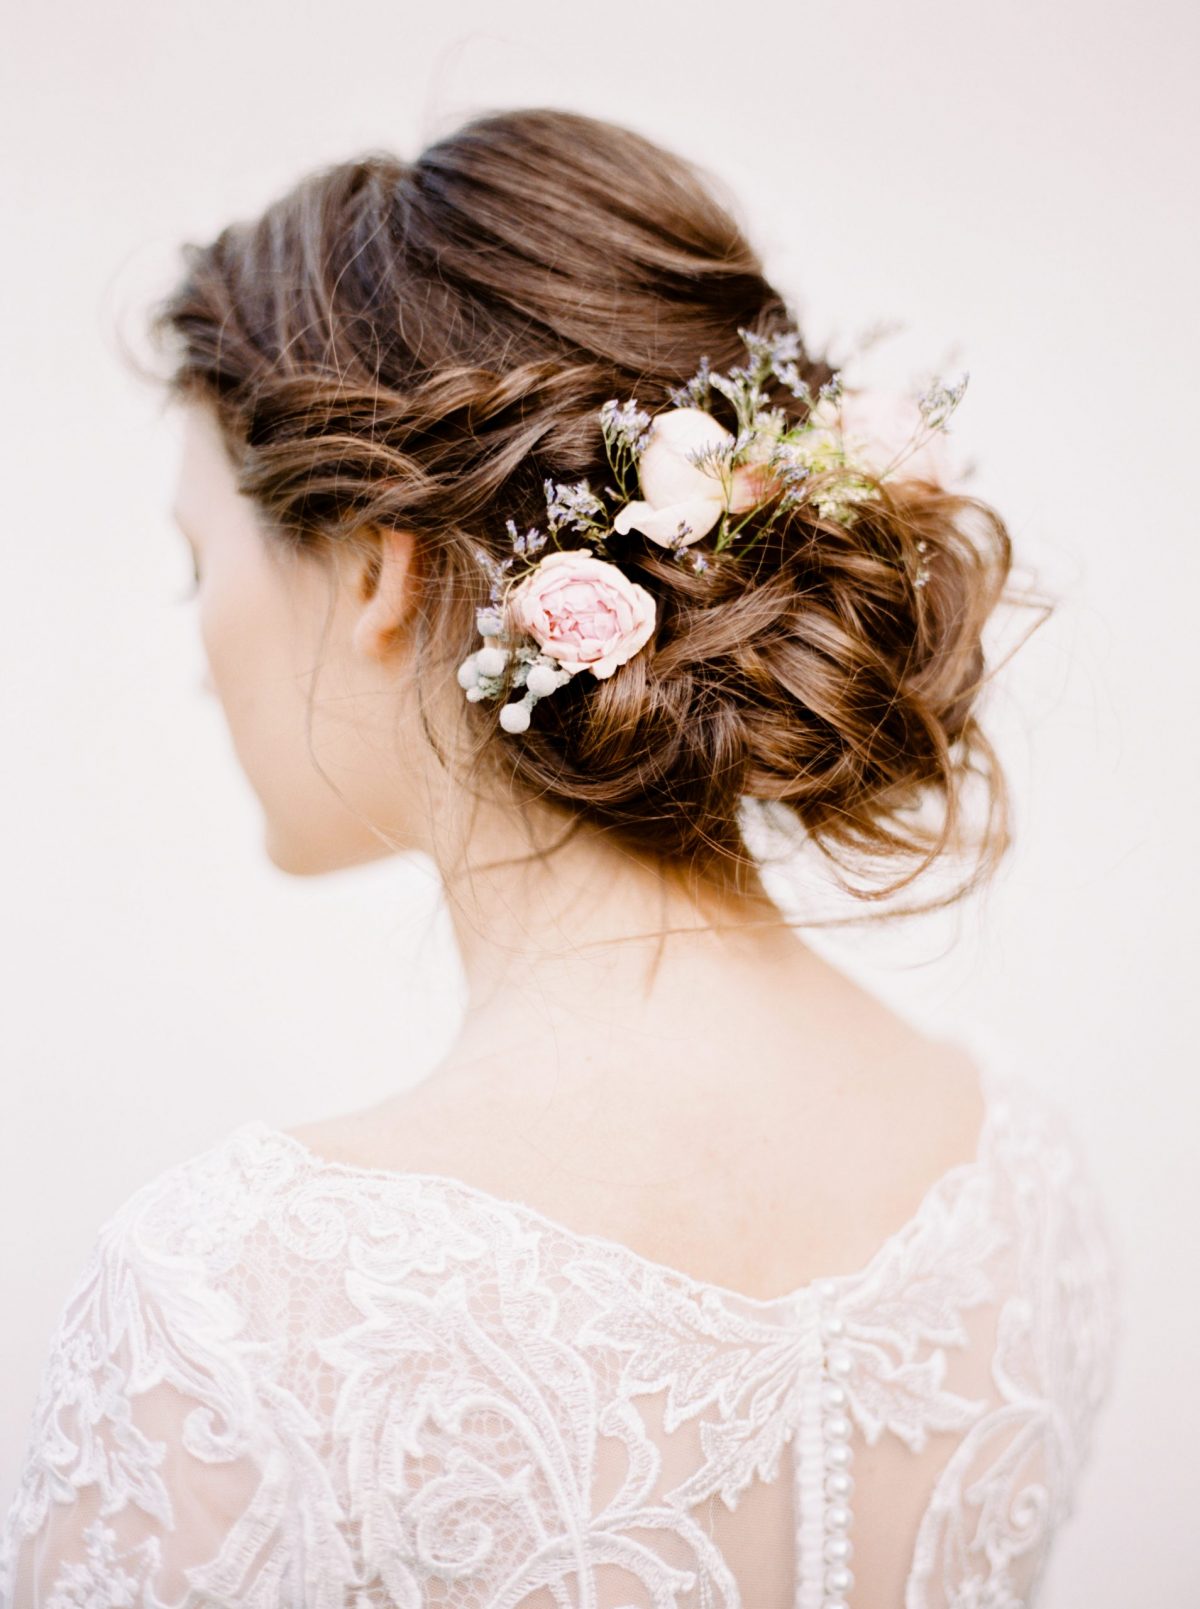 3 MOST LOVED HAIRSTYLES FOR EVERY WEDDING FUNCTION